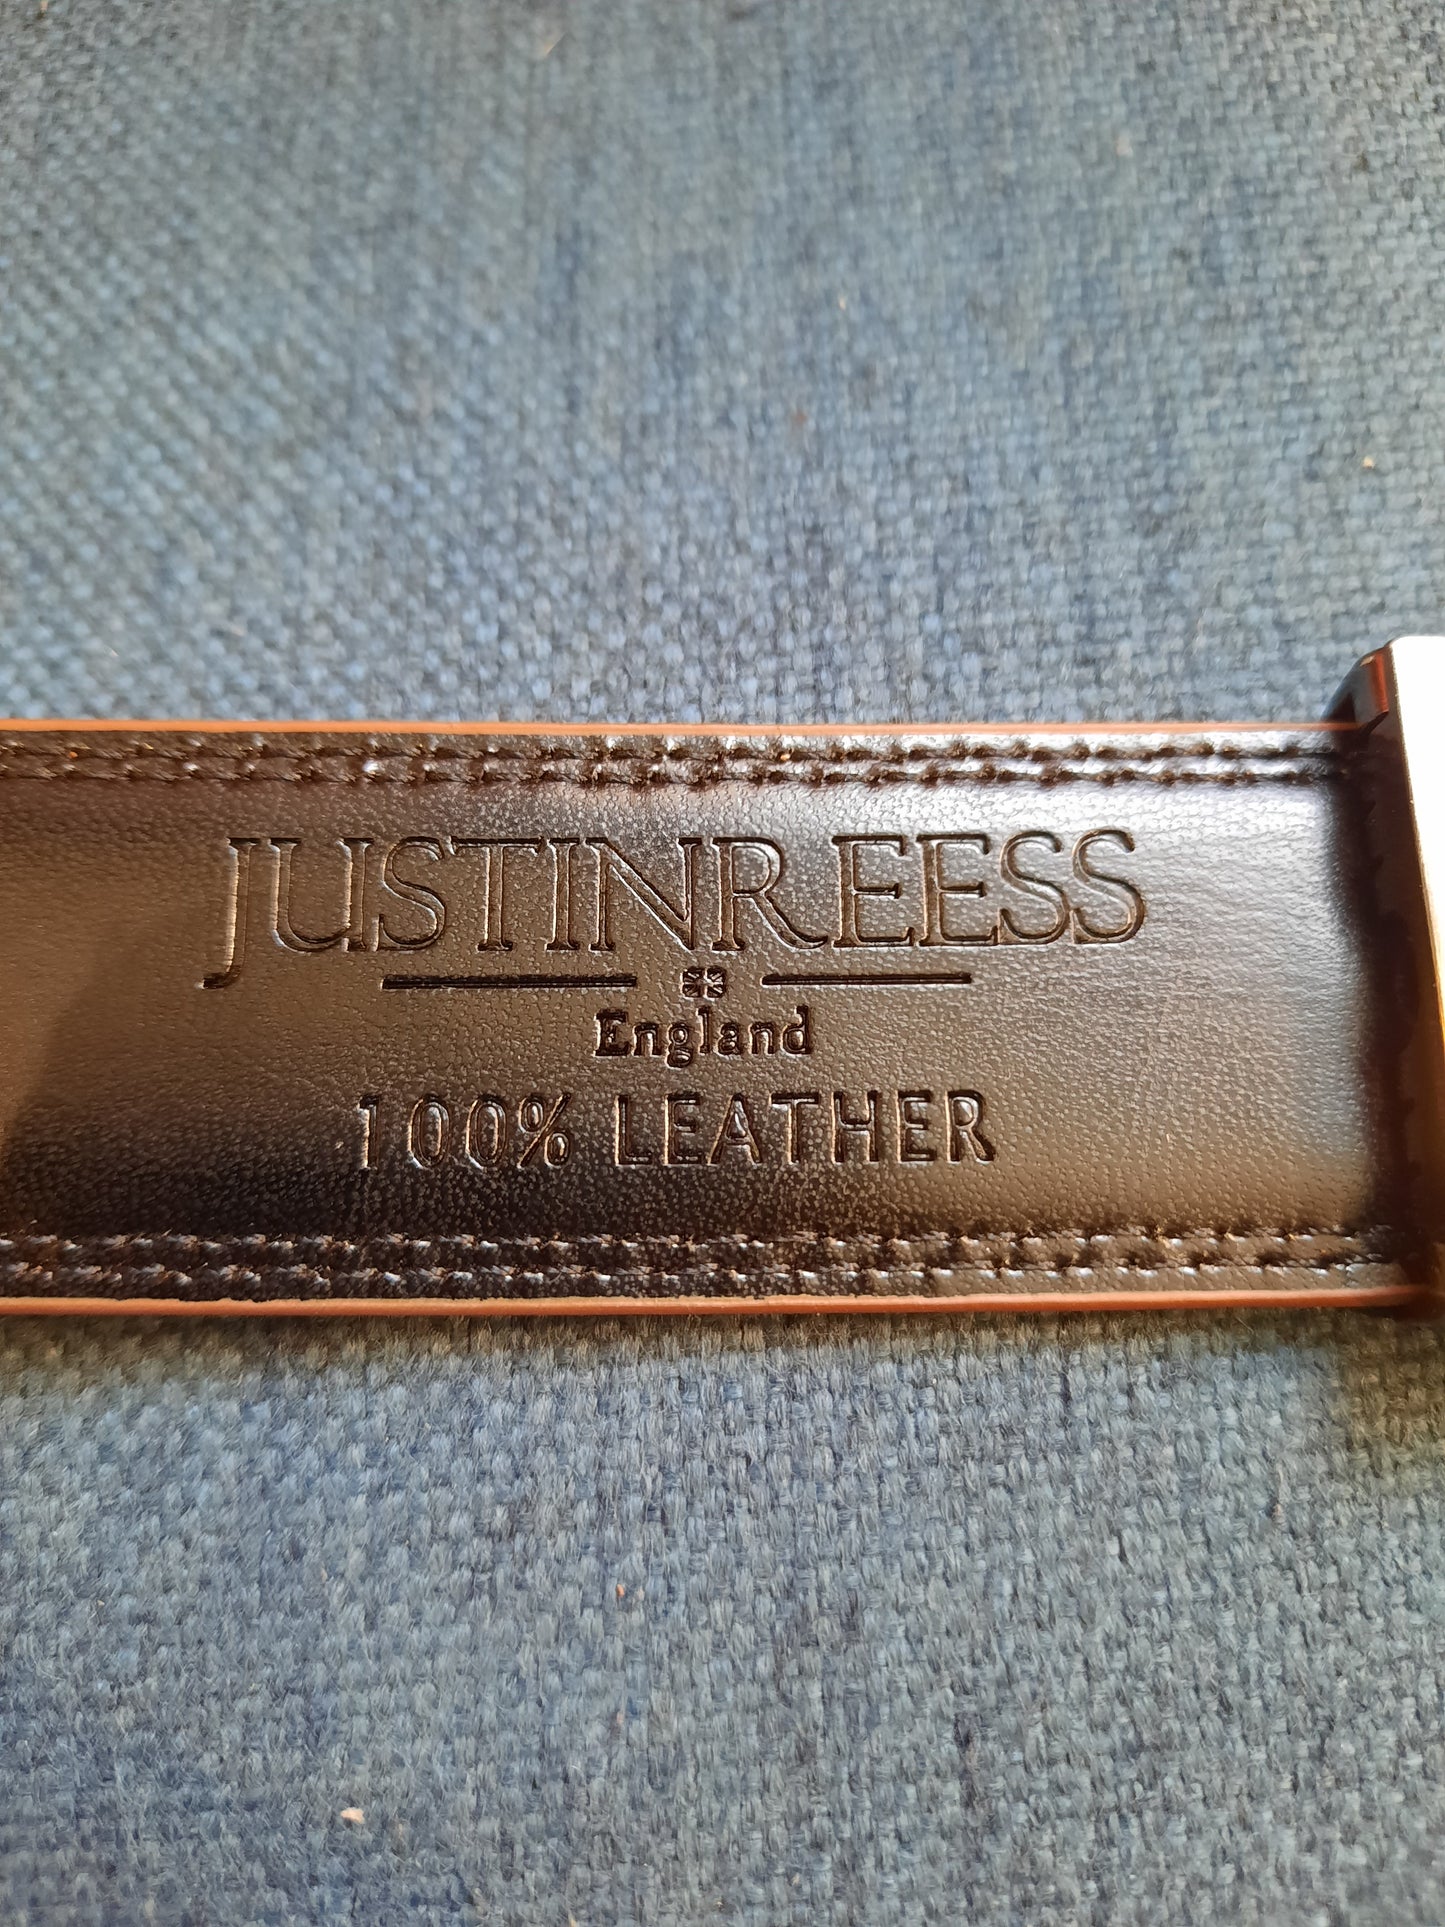 Justin Reess Reversible Leather Belts